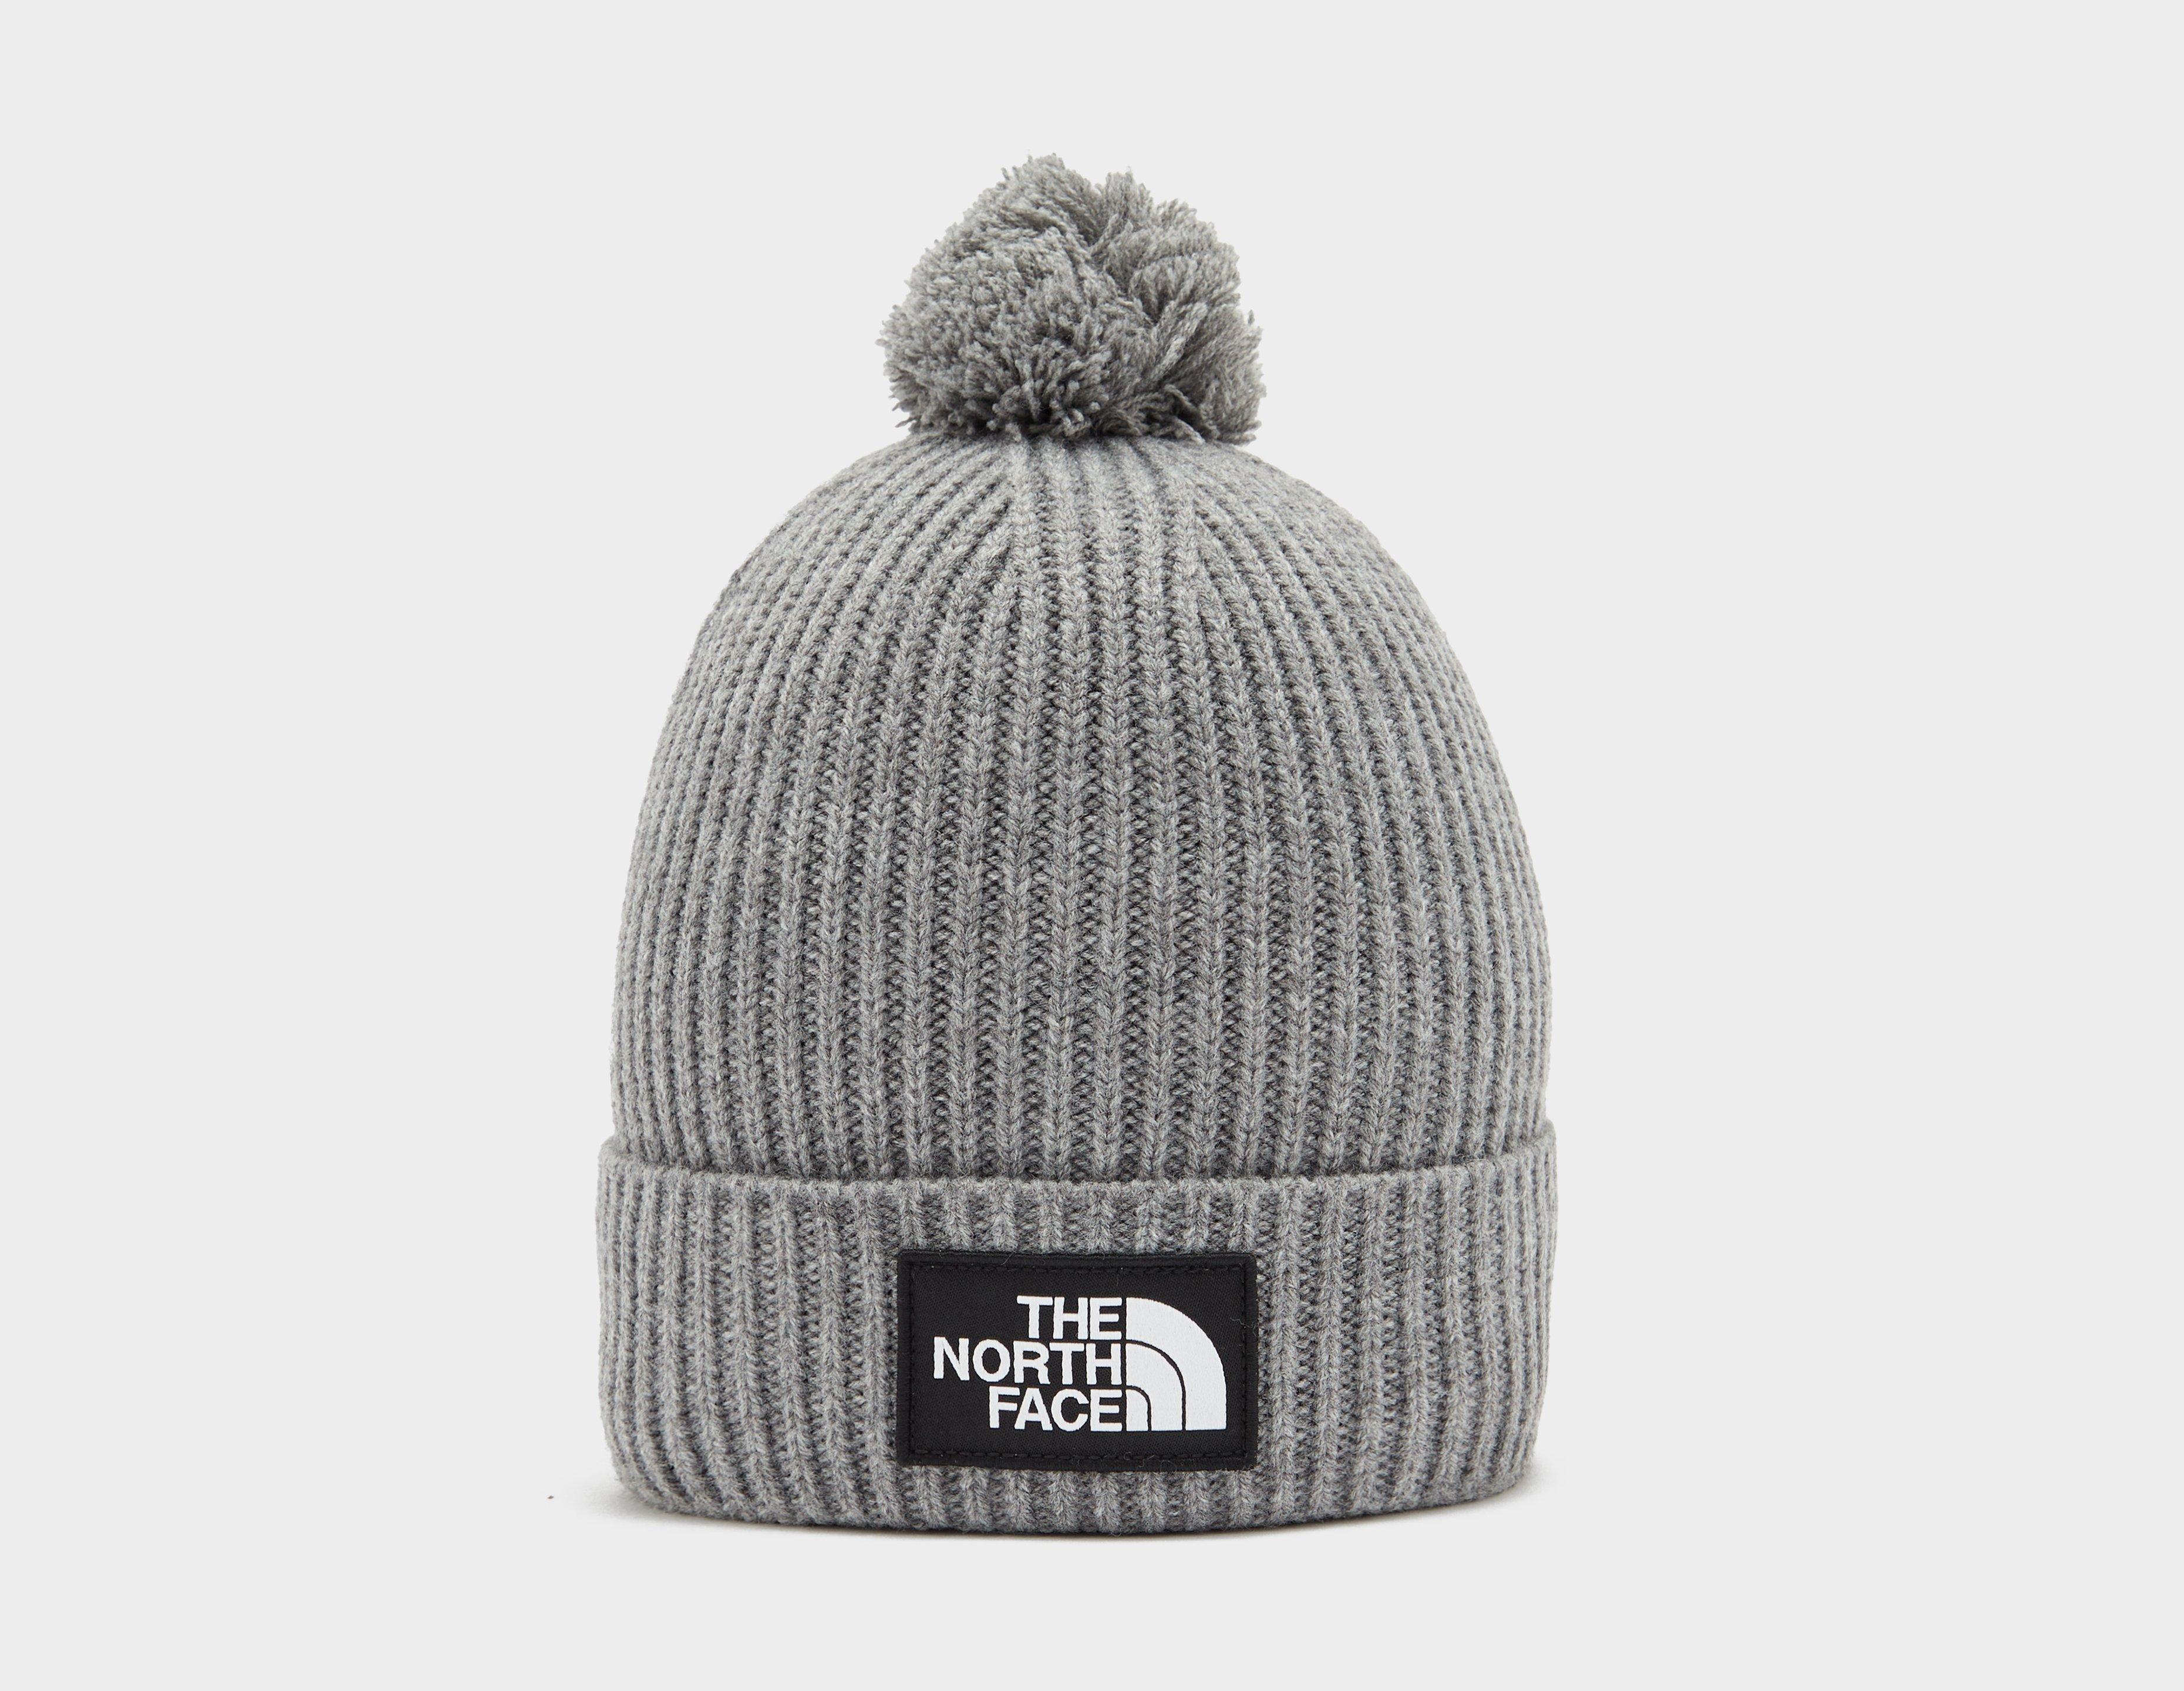 north face beanie hats on sale